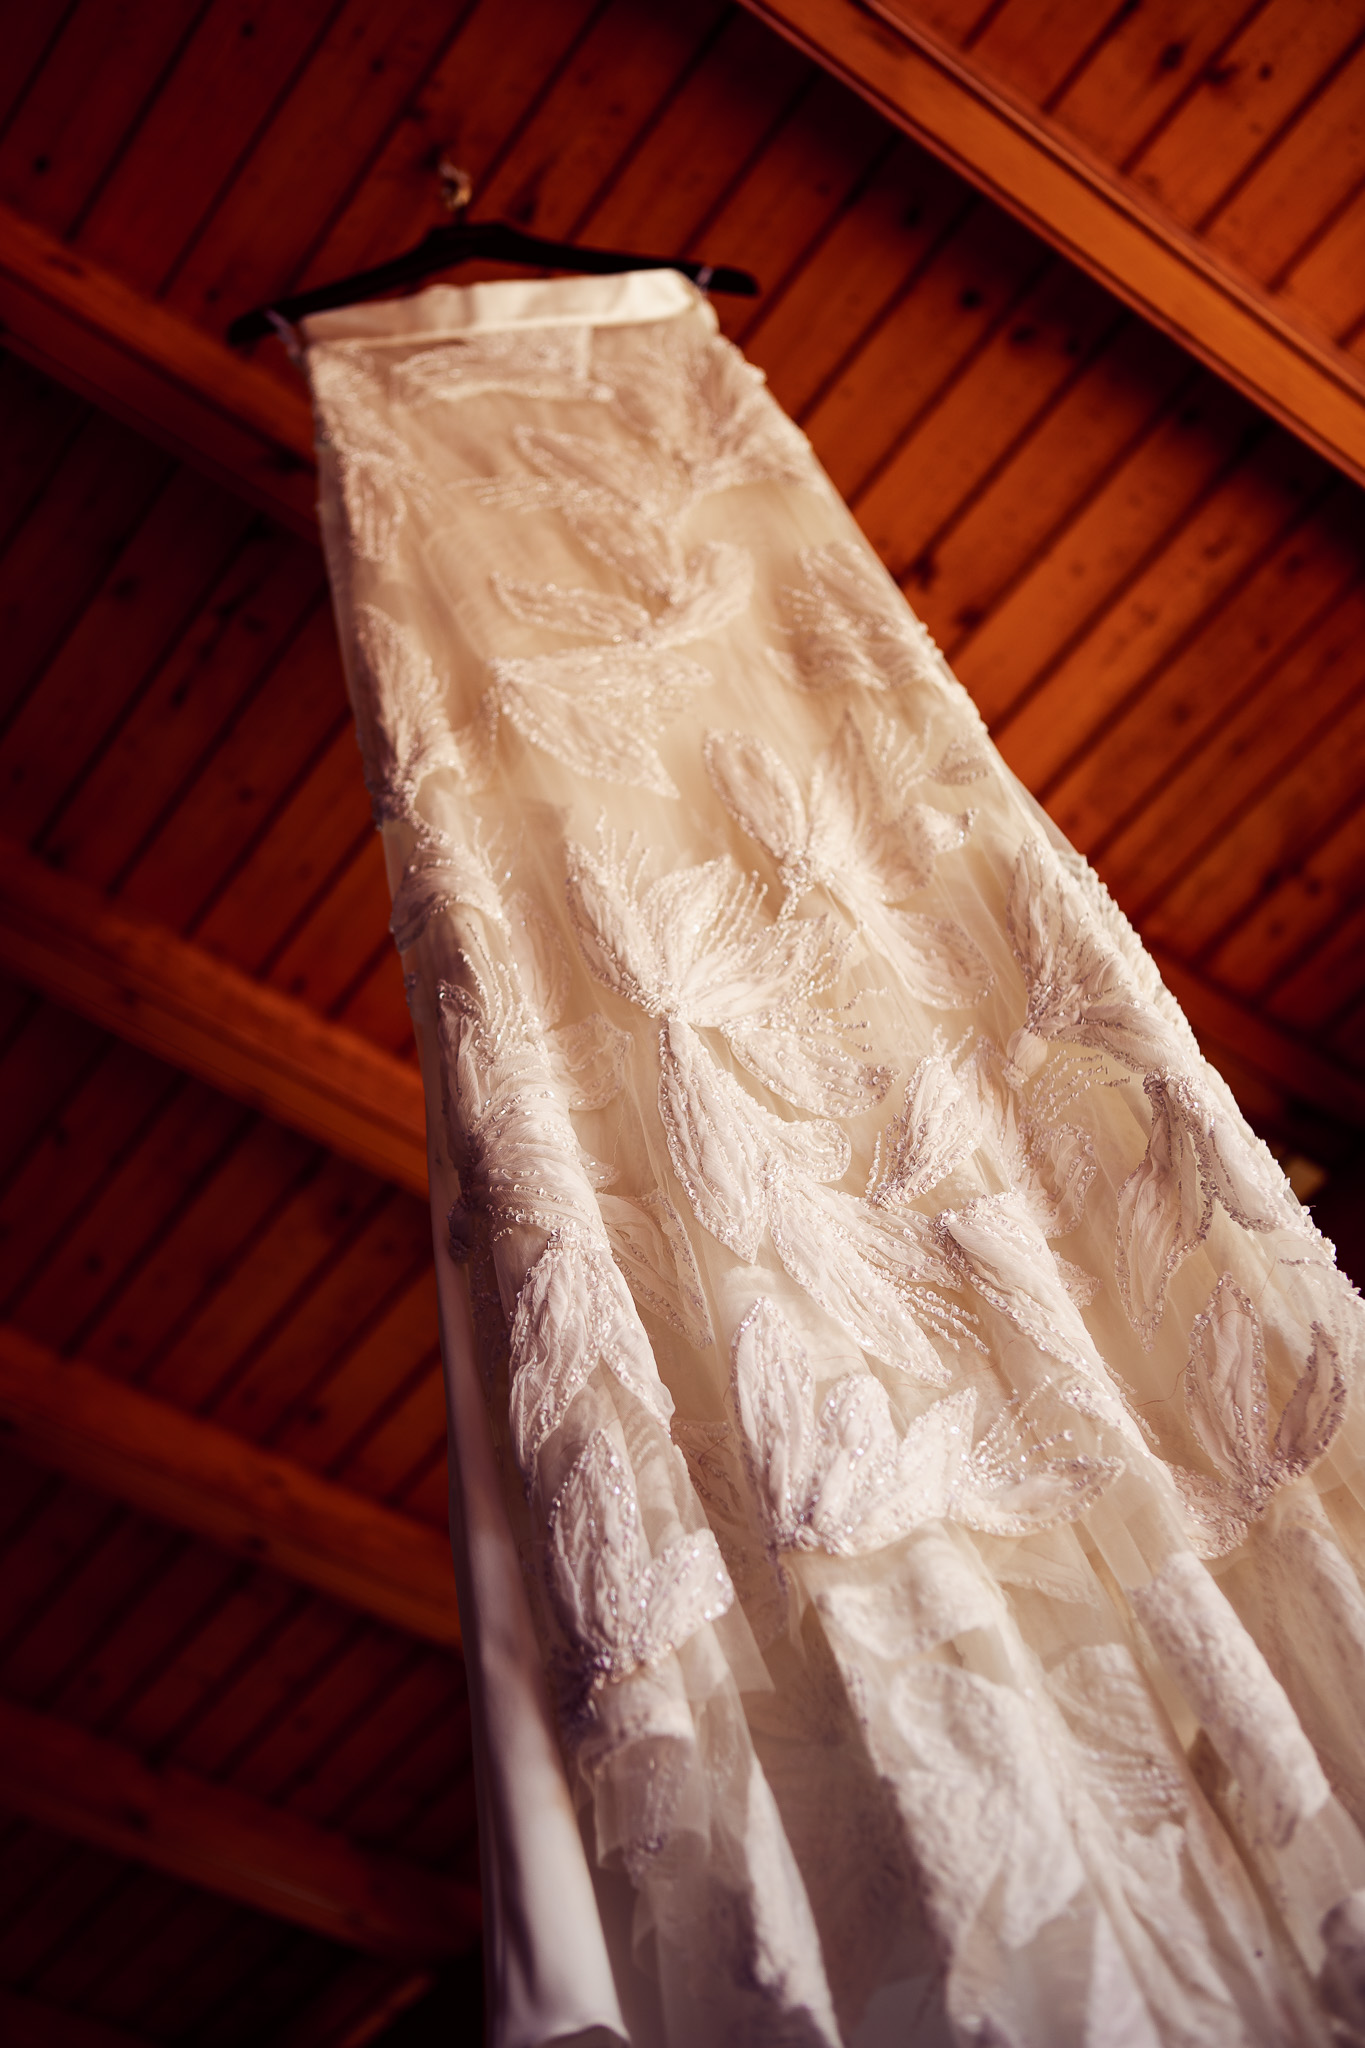 A Halfpenny wedding skirt hanging up from a ceiling.